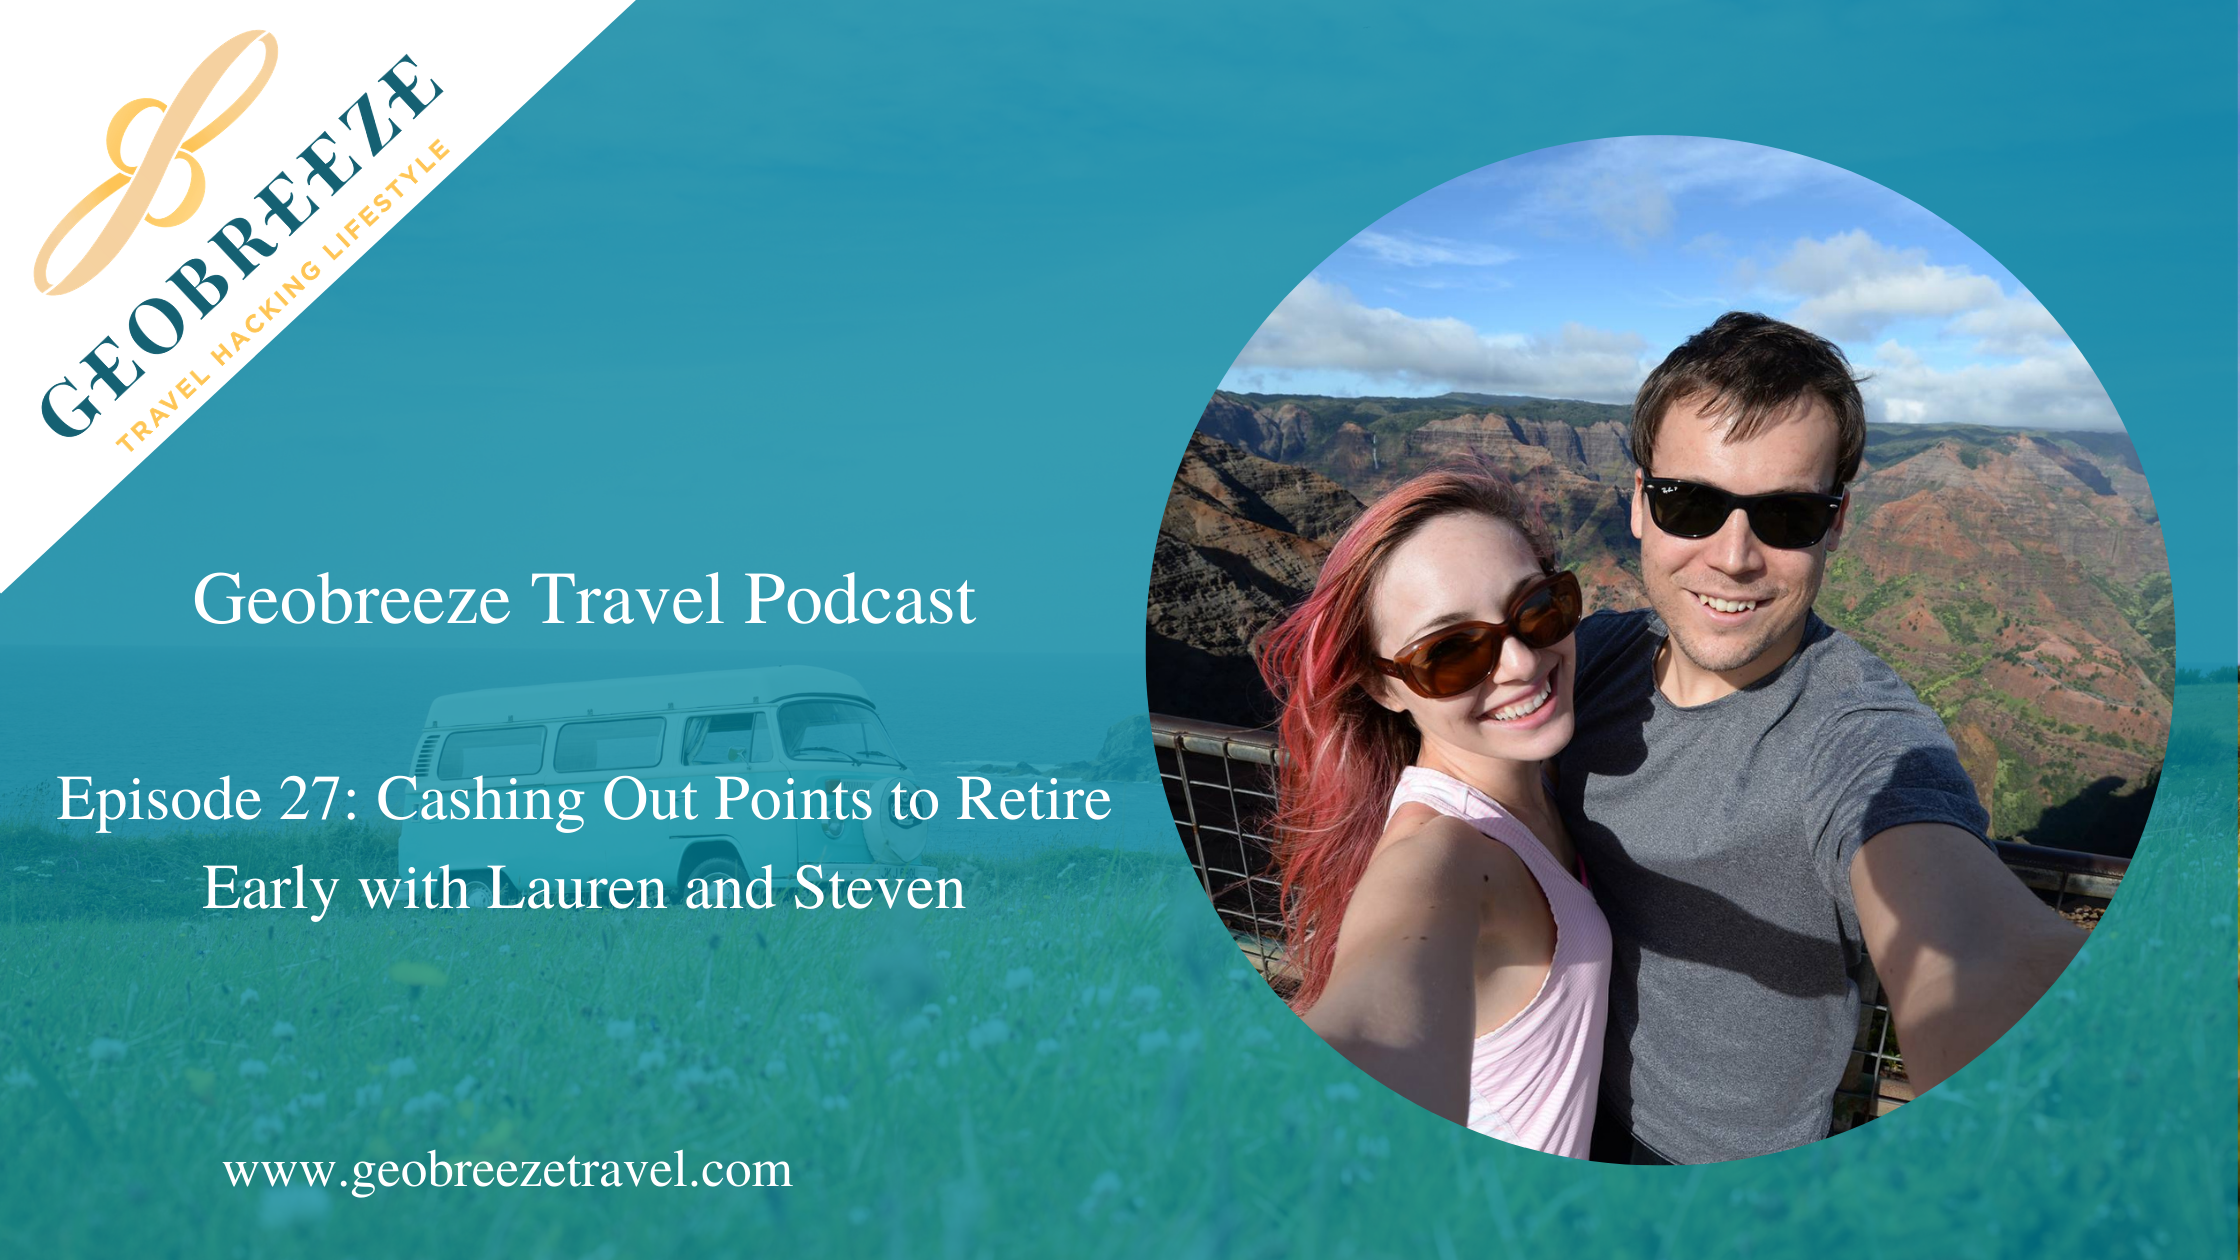 Episode 27: Cashing Out Points to Retire Early with Lauren and Steven